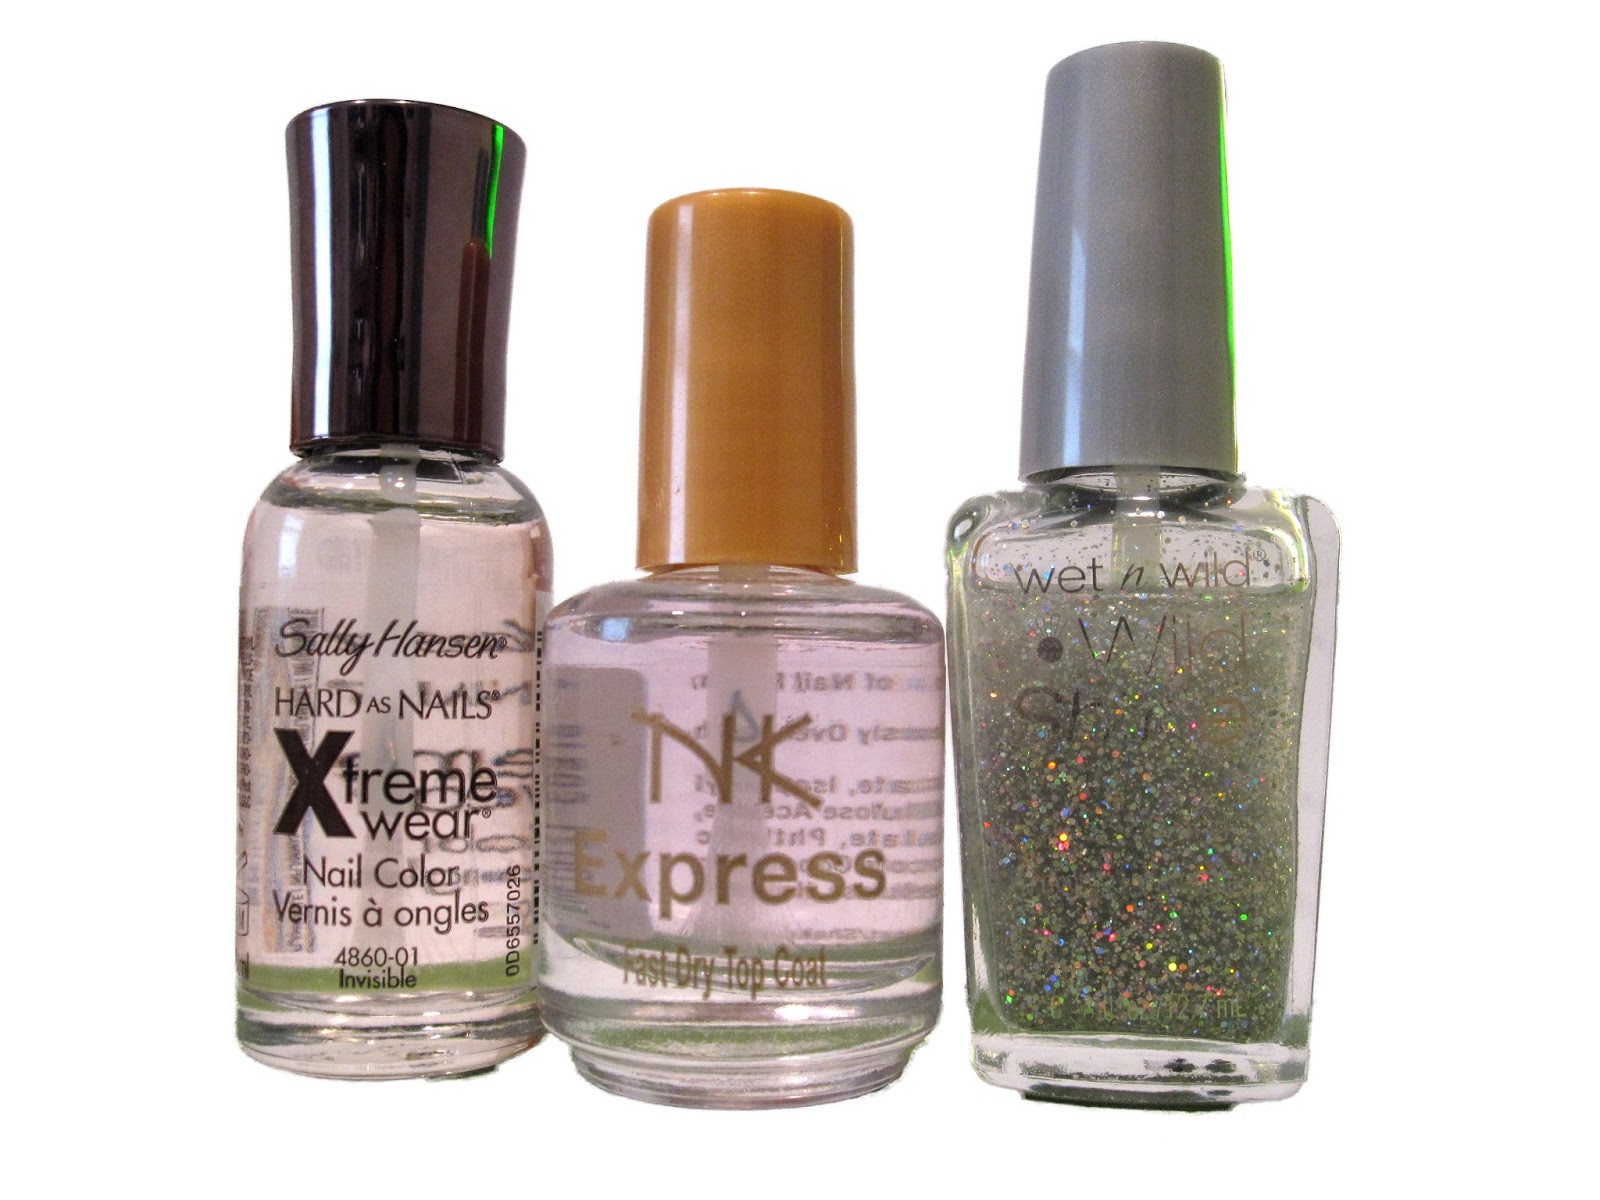 Sally Hansen Hard as Nails Xtreme Wear Nail Color, Vanity Fairest - wide 2